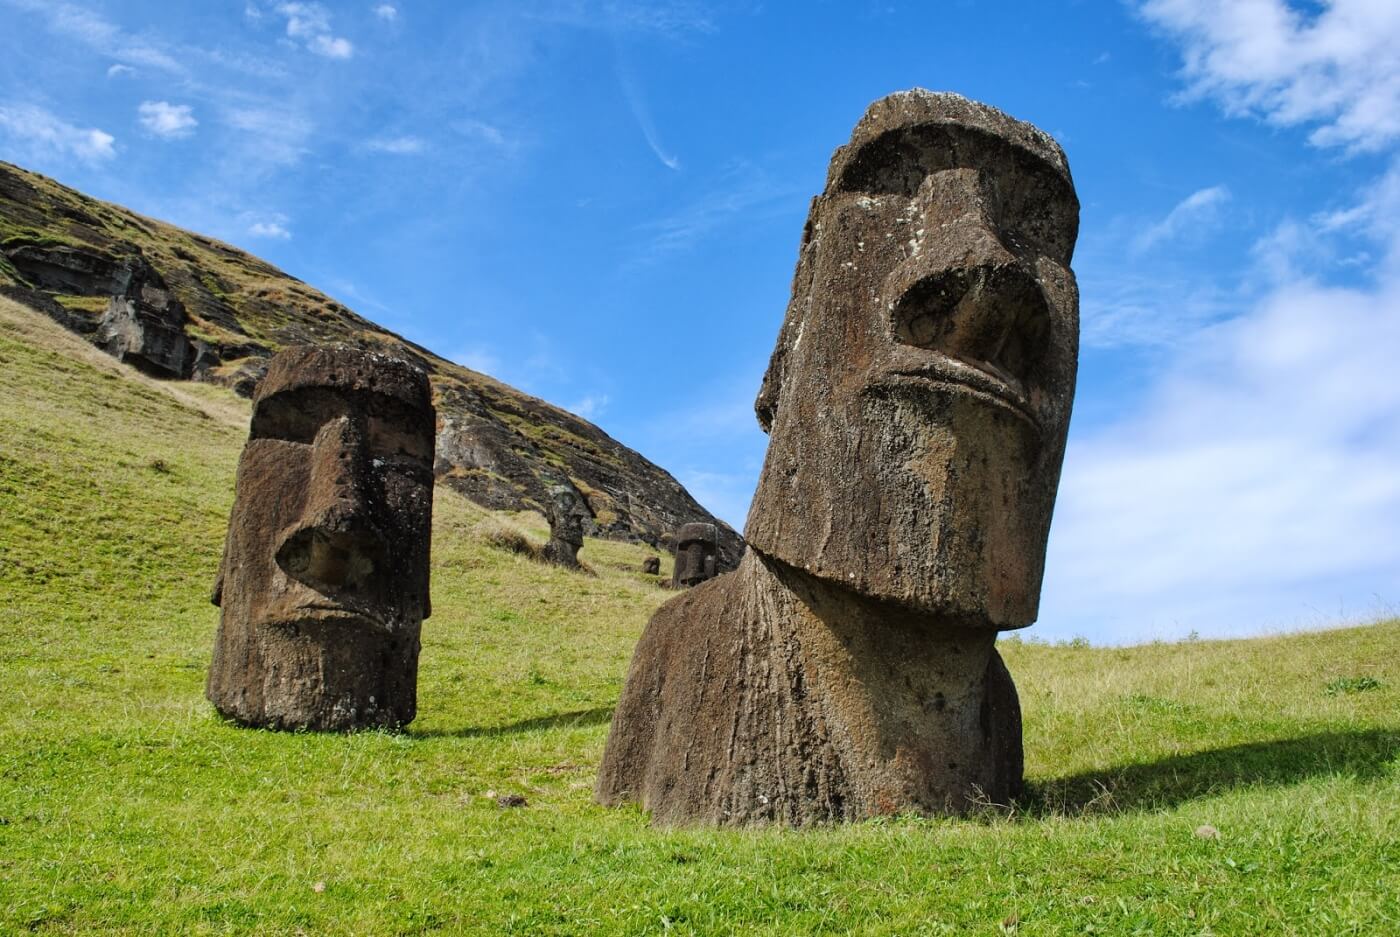 Archaeologists have solved the mystery of the statues on Easter island